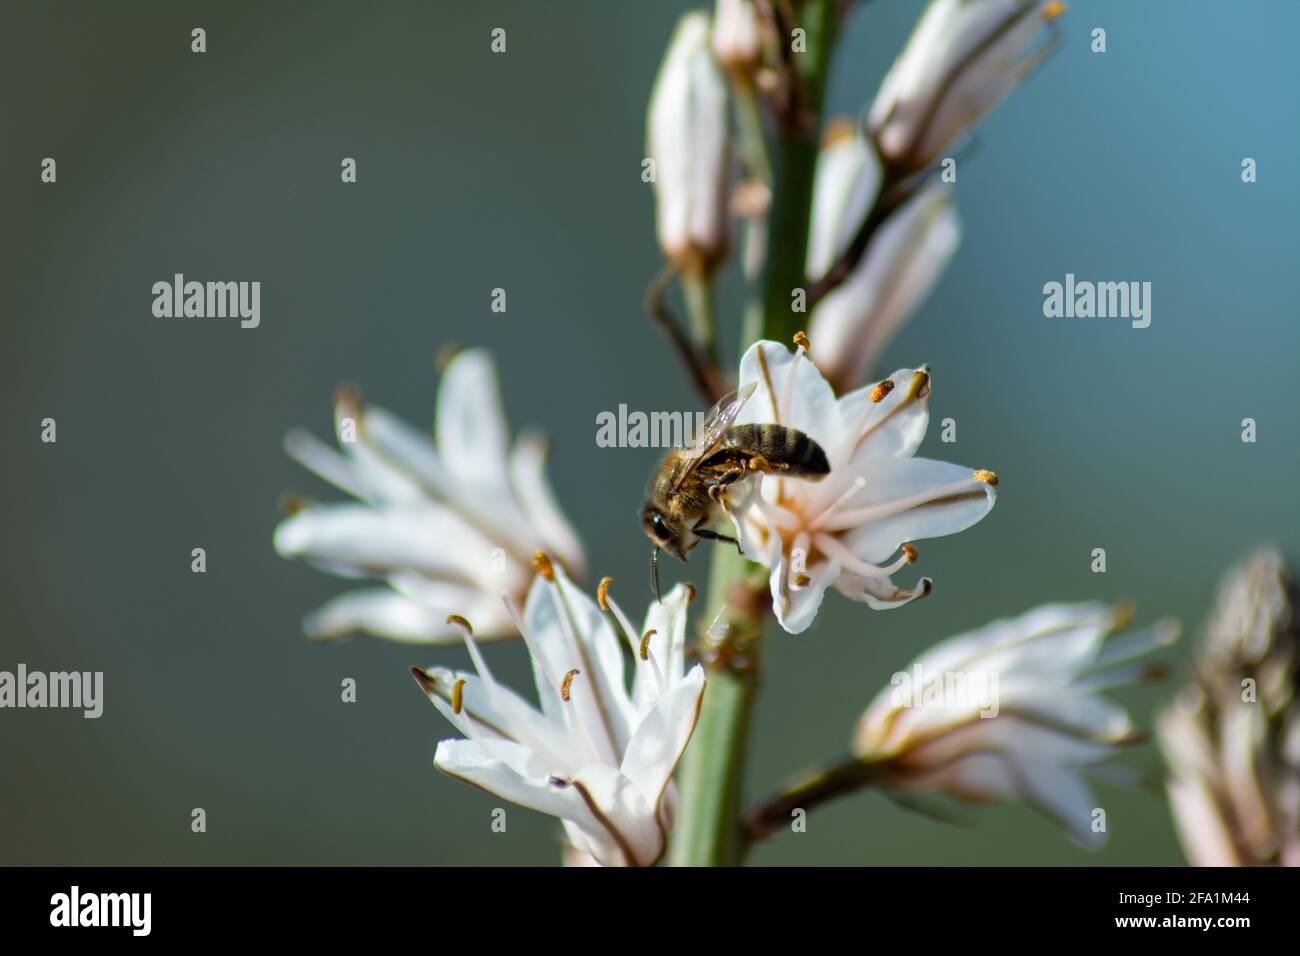 Selective focus shot of a bee sipping the nectar of an Asphodel flower in the garden Stock Photo